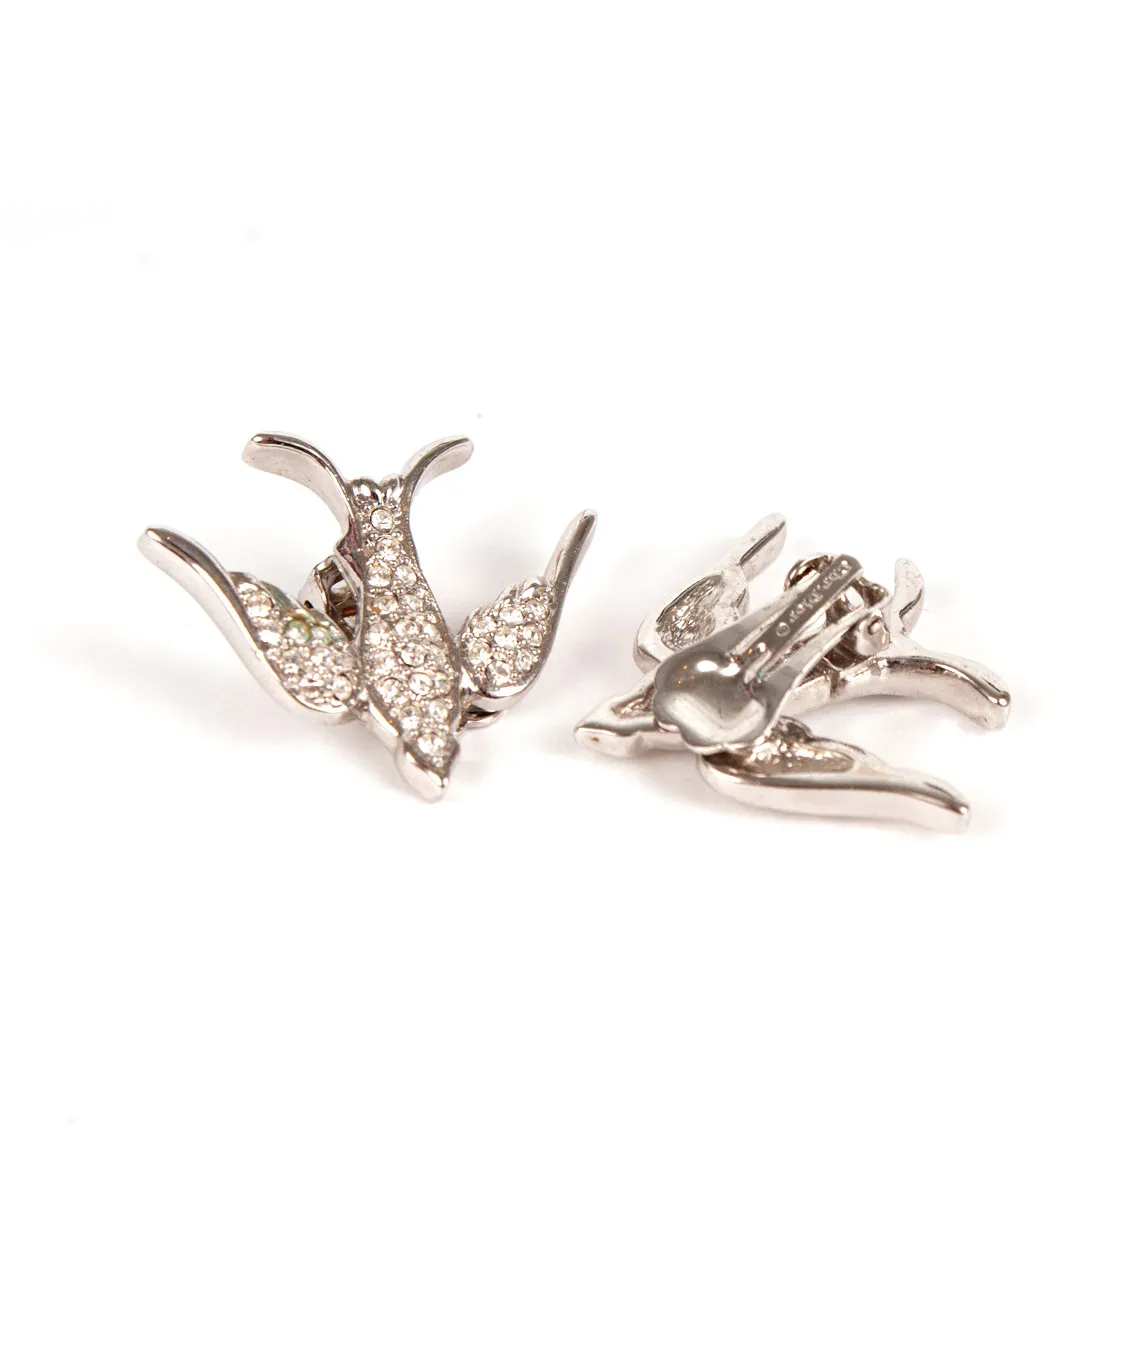 Silver plated bird earrings by Dior